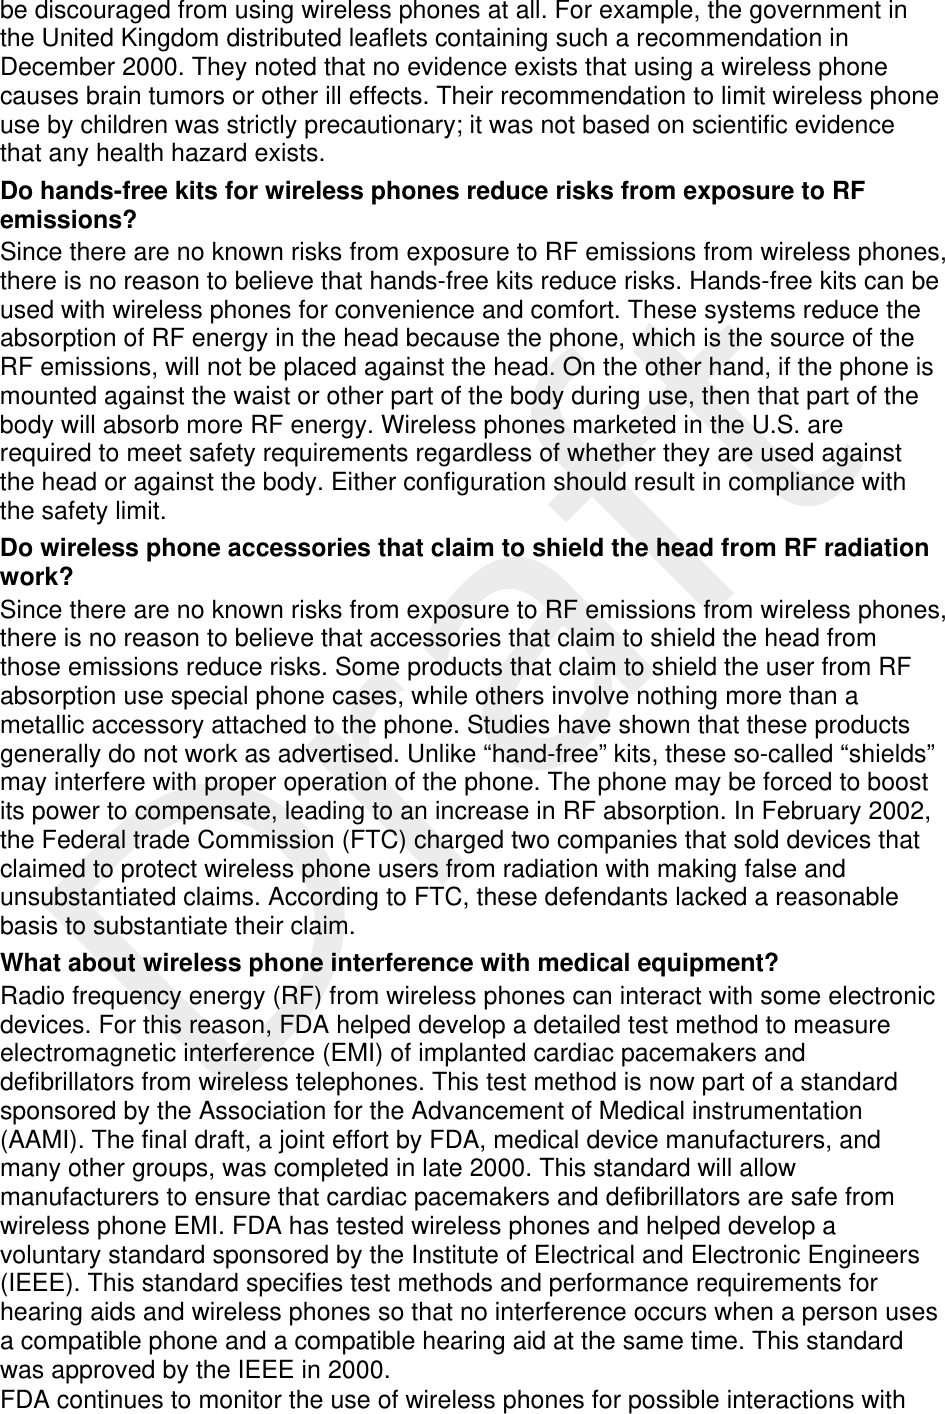  be discouraged from using wireless phones at all. For example, the government in the United Kingdom distributed leaflets containing such a recommendation in December 2000. They noted that no evidence exists that using a wireless phone causes brain tumors or other ill effects. Their recommendation to limit wireless phone use by children was strictly precautionary; it was not based on scientific evidence that any health hazard exists.   Do hands-free kits for wireless phones reduce risks from exposure to RF emissions? Since there are no known risks from exposure to RF emissions from wireless phones, there is no reason to believe that hands-free kits reduce risks. Hands-free kits can be used with wireless phones for convenience and comfort. These systems reduce the absorption of RF energy in the head because the phone, which is the source of the RF emissions, will not be placed against the head. On the other hand, if the phone is mounted against the waist or other part of the body during use, then that part of the body will absorb more RF energy. Wireless phones marketed in the U.S. are required to meet safety requirements regardless of whether they are used against the head or against the body. Either configuration should result in compliance with the safety limit. Do wireless phone accessories that claim to shield the head from RF radiation work? Since there are no known risks from exposure to RF emissions from wireless phones, there is no reason to believe that accessories that claim to shield the head from those emissions reduce risks. Some products that claim to shield the user from RF absorption use special phone cases, while others involve nothing more than a metallic accessory attached to the phone. Studies have shown that these products generally do not work as advertised. Unlike “hand-free” kits, these so-called “shields” may interfere with proper operation of the phone. The phone may be forced to boost its power to compensate, leading to an increase in RF absorption. In February 2002, the Federal trade Commission (FTC) charged two companies that sold devices that claimed to protect wireless phone users from radiation with making false and unsubstantiated claims. According to FTC, these defendants lacked a reasonable basis to substantiate their claim. What about wireless phone interference with medical equipment? Radio frequency energy (RF) from wireless phones can interact with some electronic devices. For this reason, FDA helped develop a detailed test method to measure electromagnetic interference (EMI) of implanted cardiac pacemakers and defibrillators from wireless telephones. This test method is now part of a standard sponsored by the Association for the Advancement of Medical instrumentation (AAMI). The final draft, a joint effort by FDA, medical device manufacturers, and many other groups, was completed in late 2000. This standard will allow manufacturers to ensure that cardiac pacemakers and defibrillators are safe from wireless phone EMI. FDA has tested wireless phones and helped develop a voluntary standard sponsored by the Institute of Electrical and Electronic Engineers (IEEE). This standard specifies test methods and performance requirements for hearing aids and wireless phones so that no interference occurs when a person uses a compatible phone and a compatible hearing aid at the same time. This standard was approved by the IEEE in 2000. FDA continues to monitor the use of wireless phones for possible interactions with 